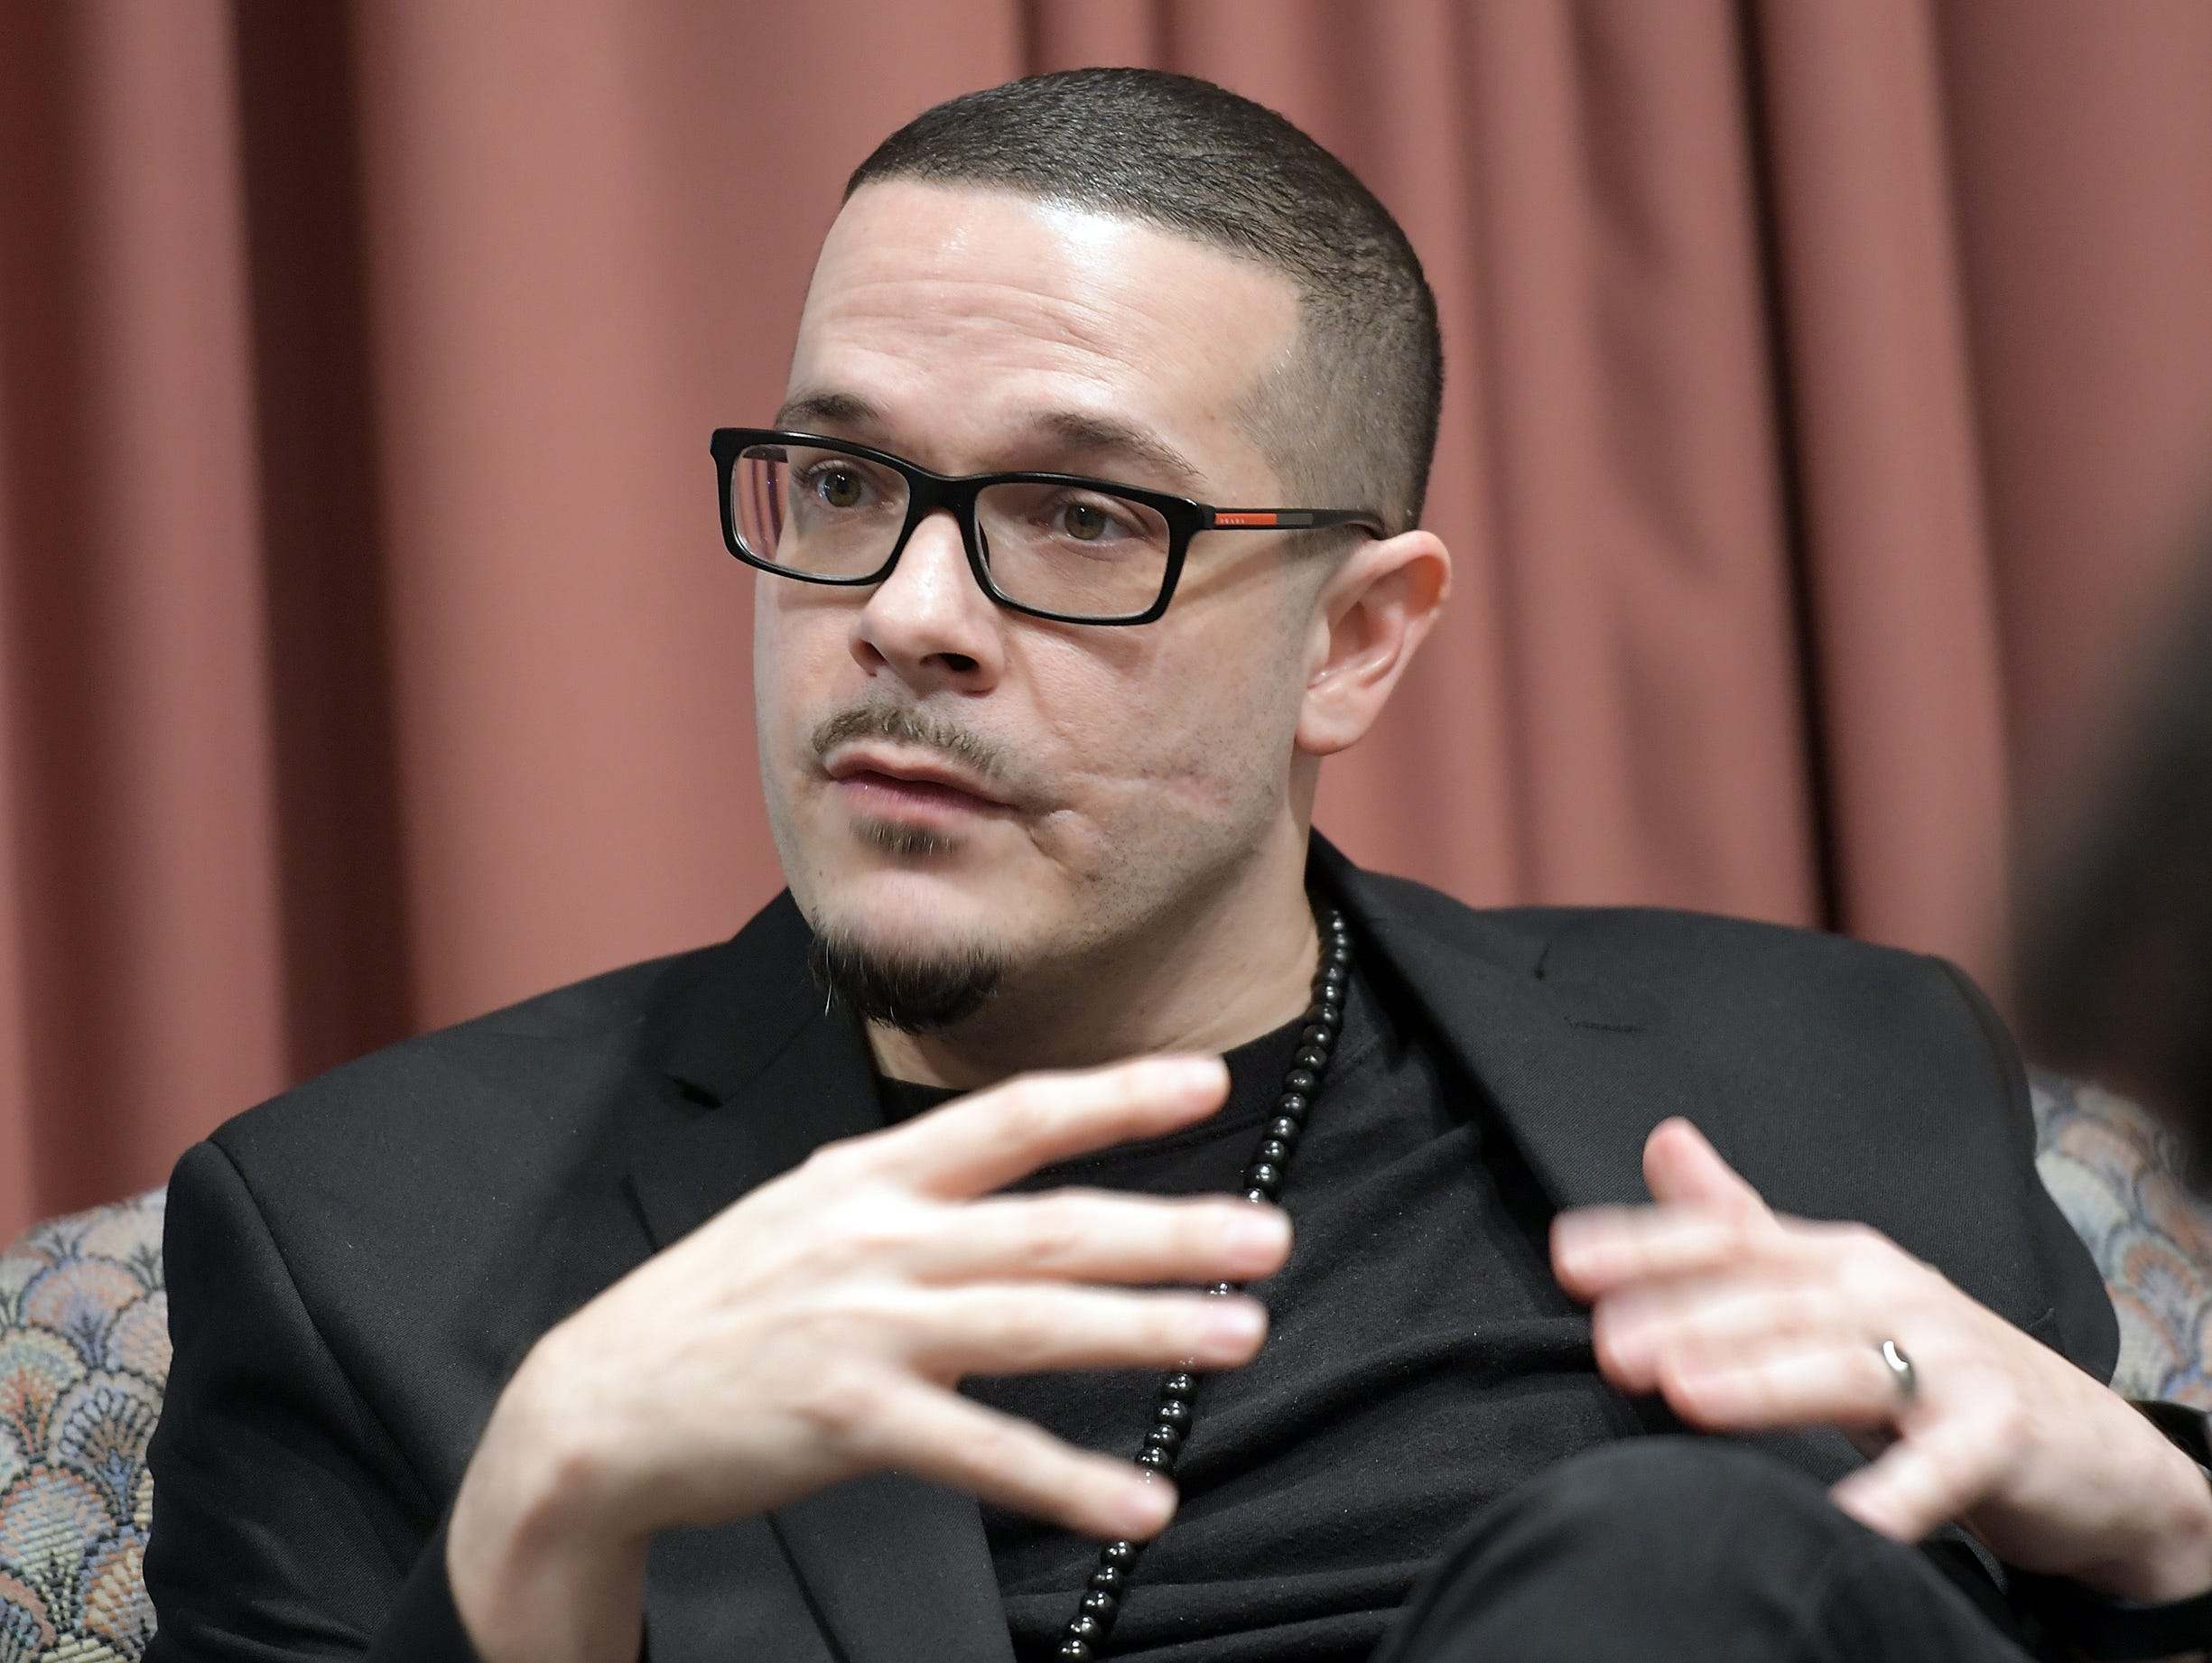 Shaun King’s Controversial Claim Of Helping Free U.S. Hostages Draws Skepticism